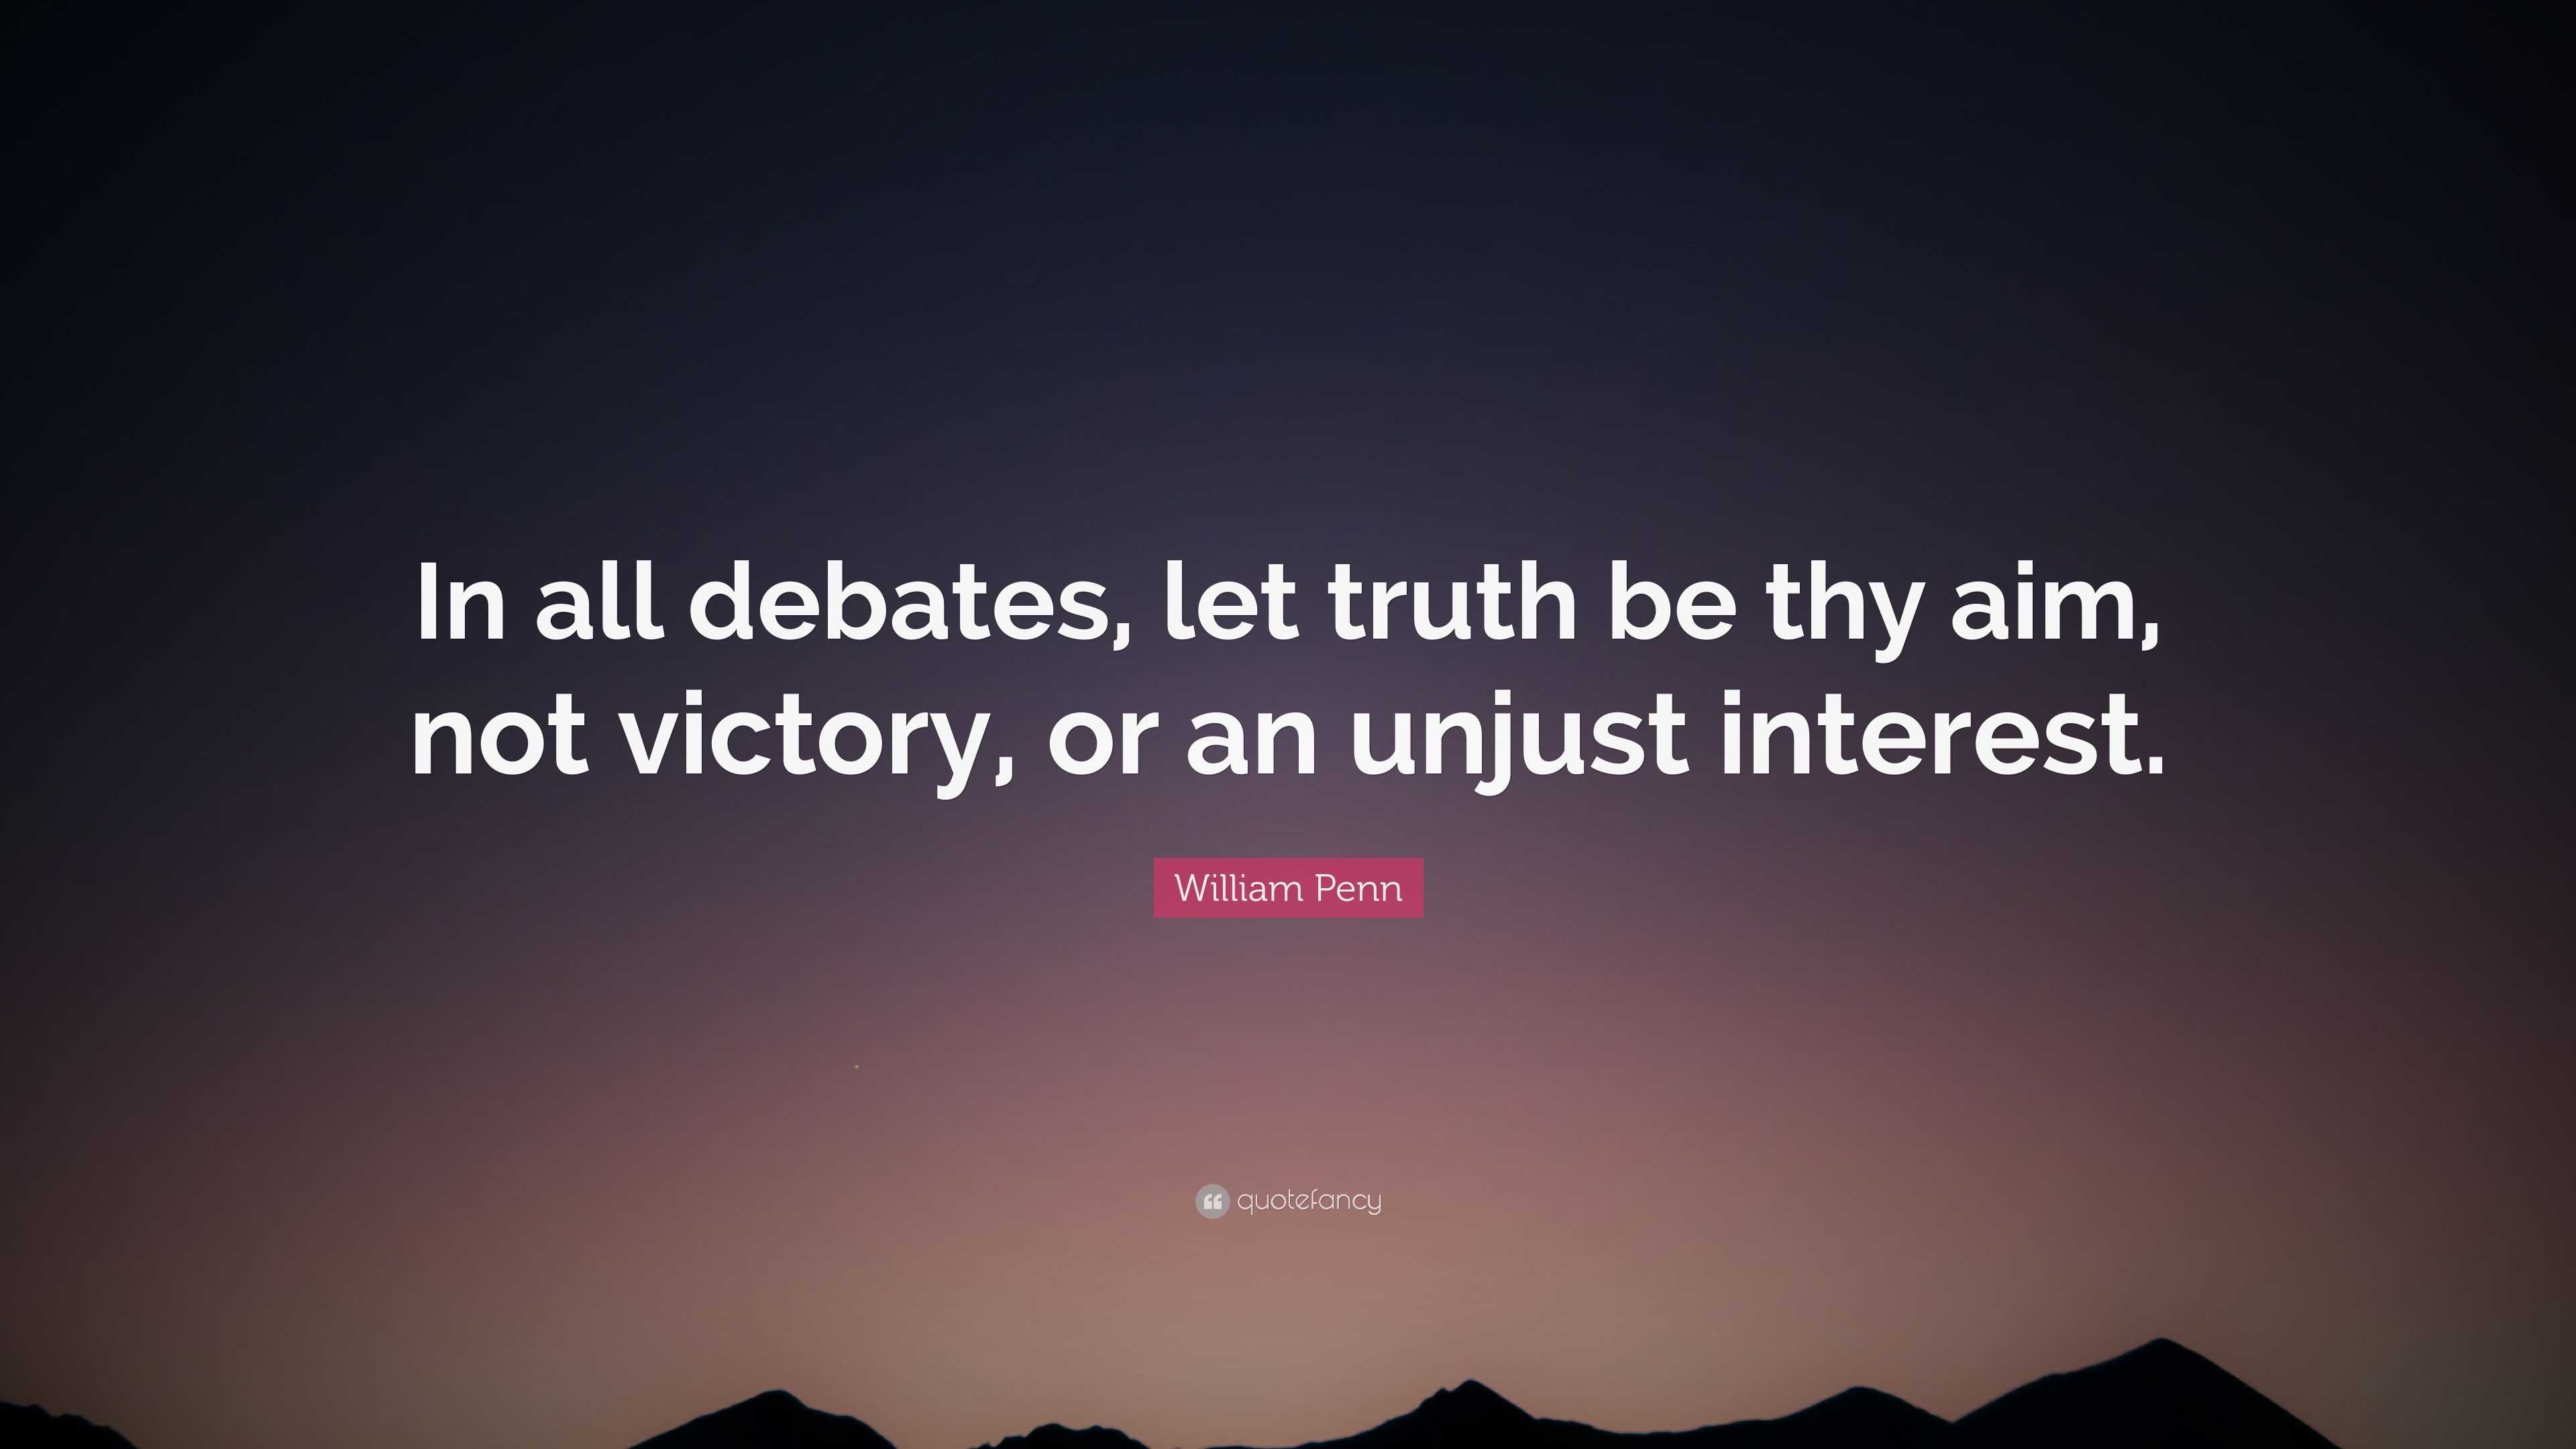 William Penn Quote “In all debates, let truth be thy aim, not victory